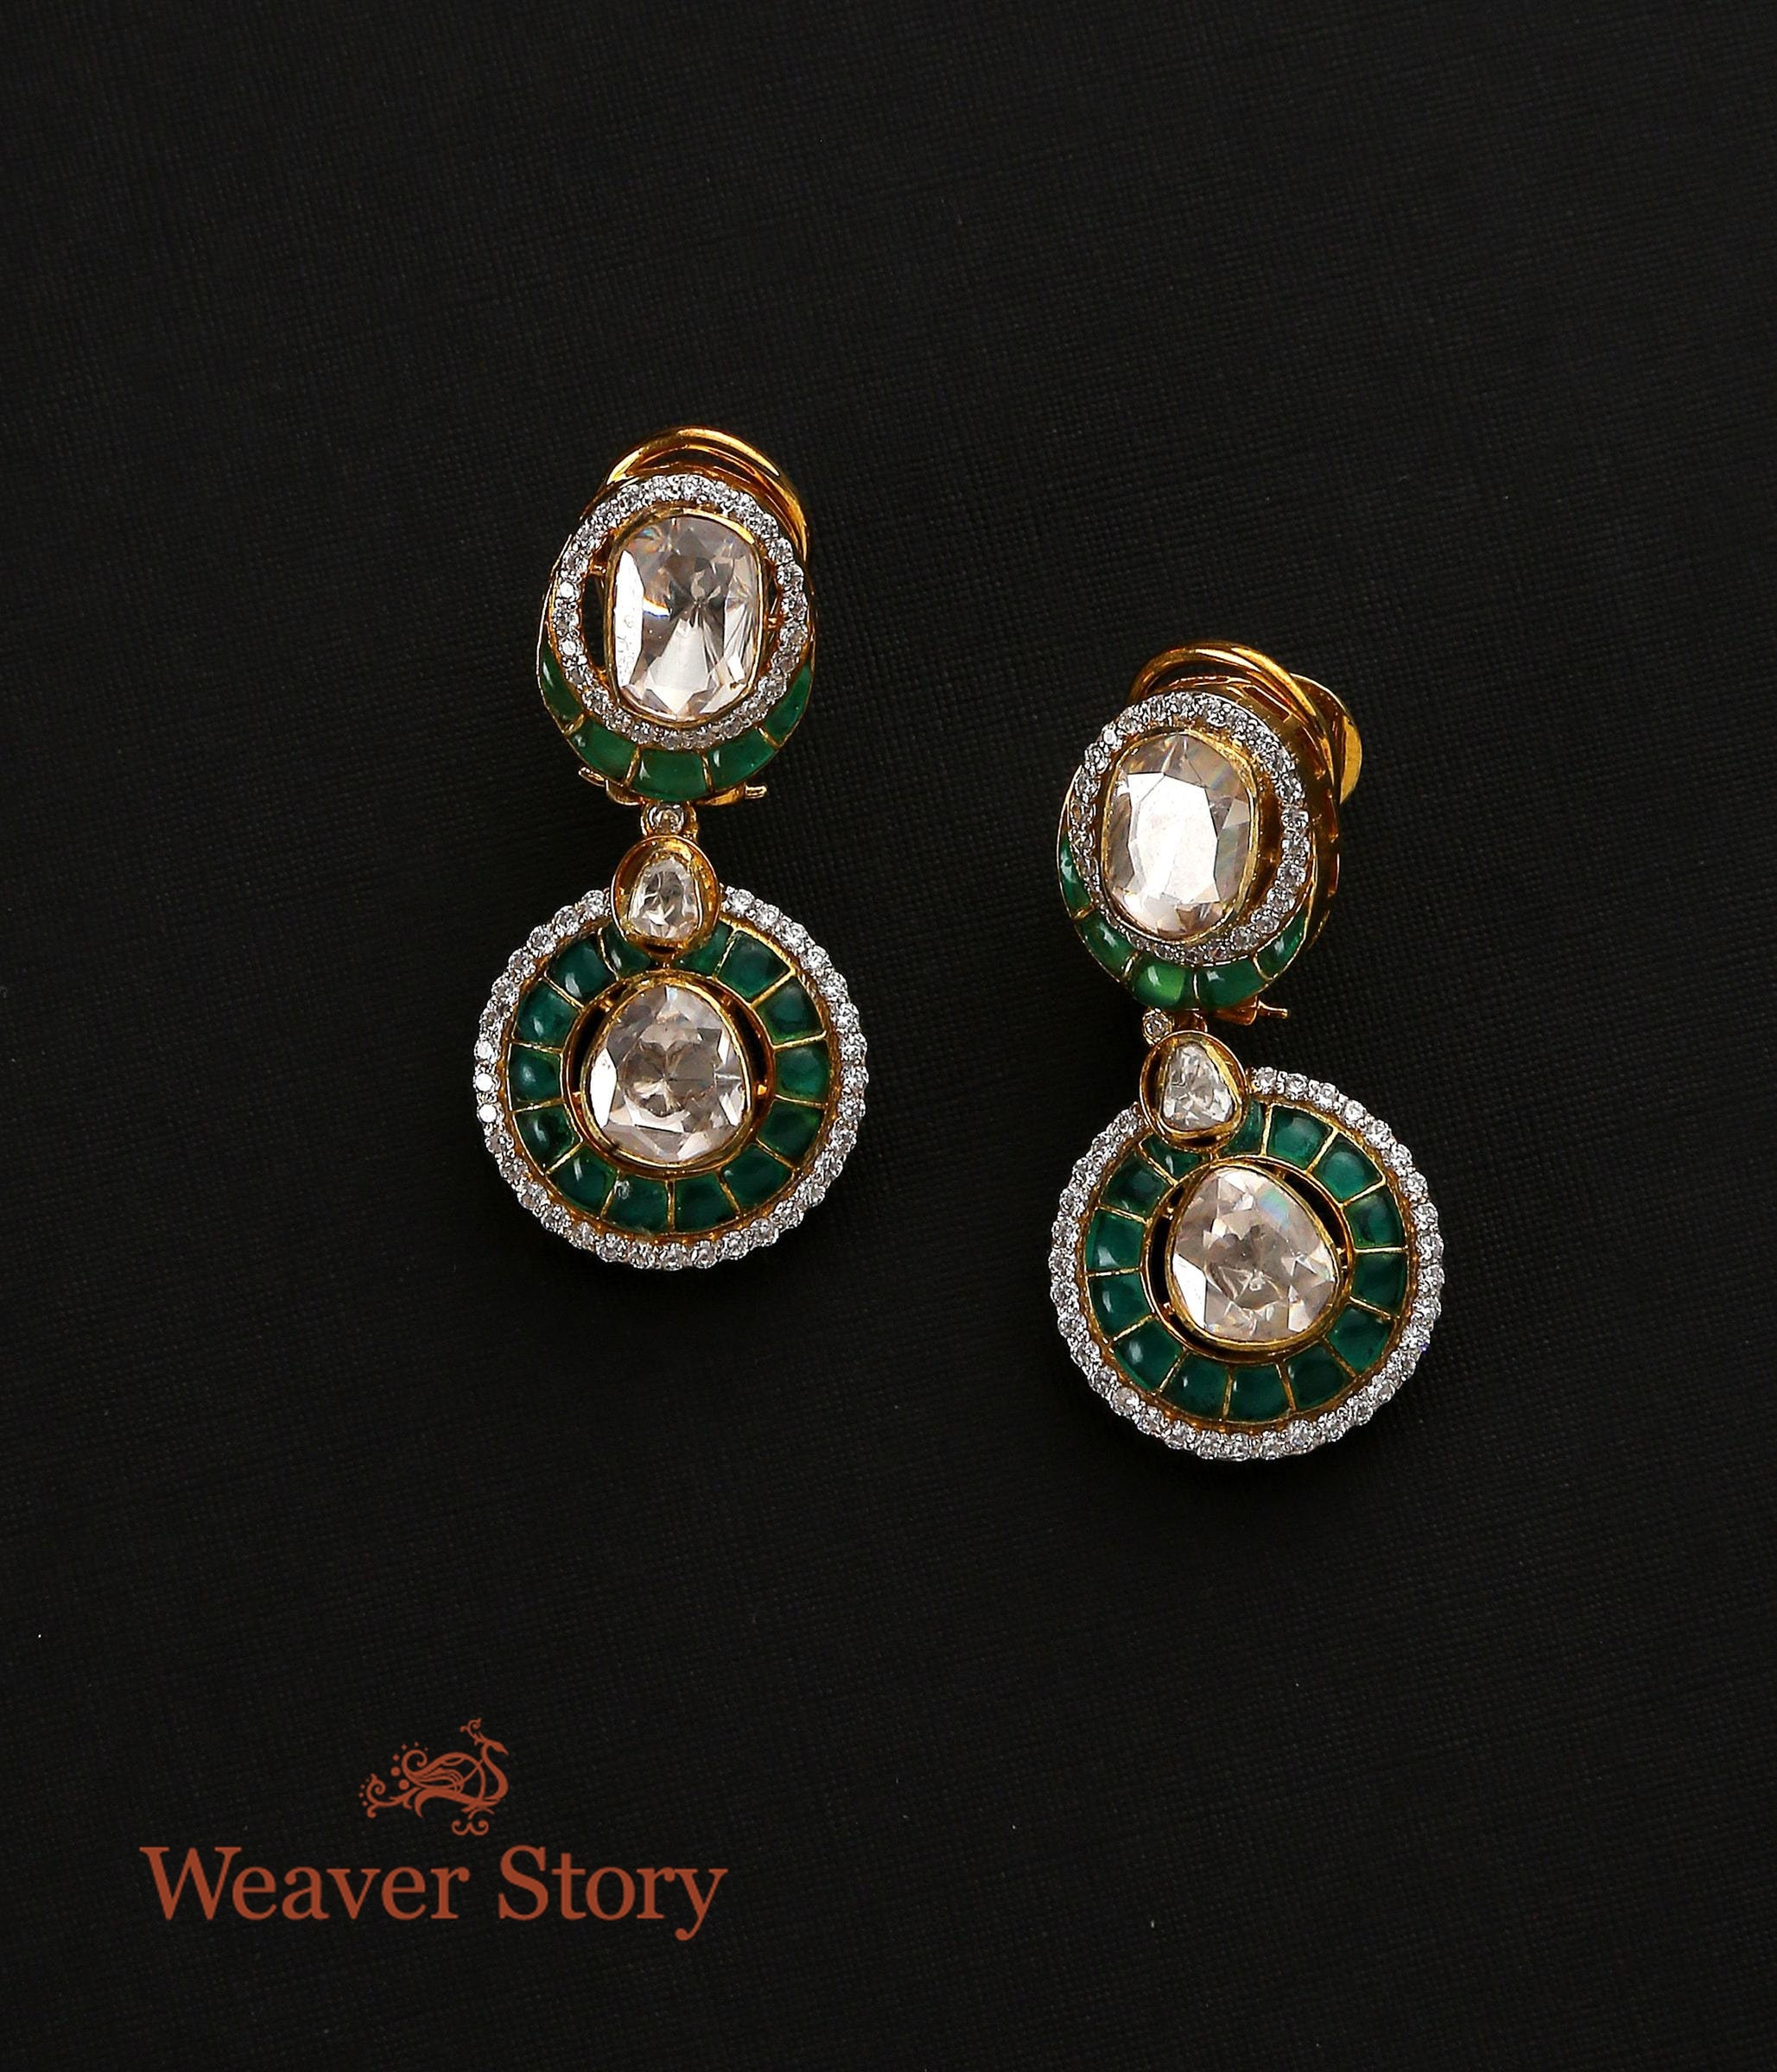 Aqsa_Earrings_with_Moissanite_Polki_Crafted_in_Pure_Silver_WeaverStory_02